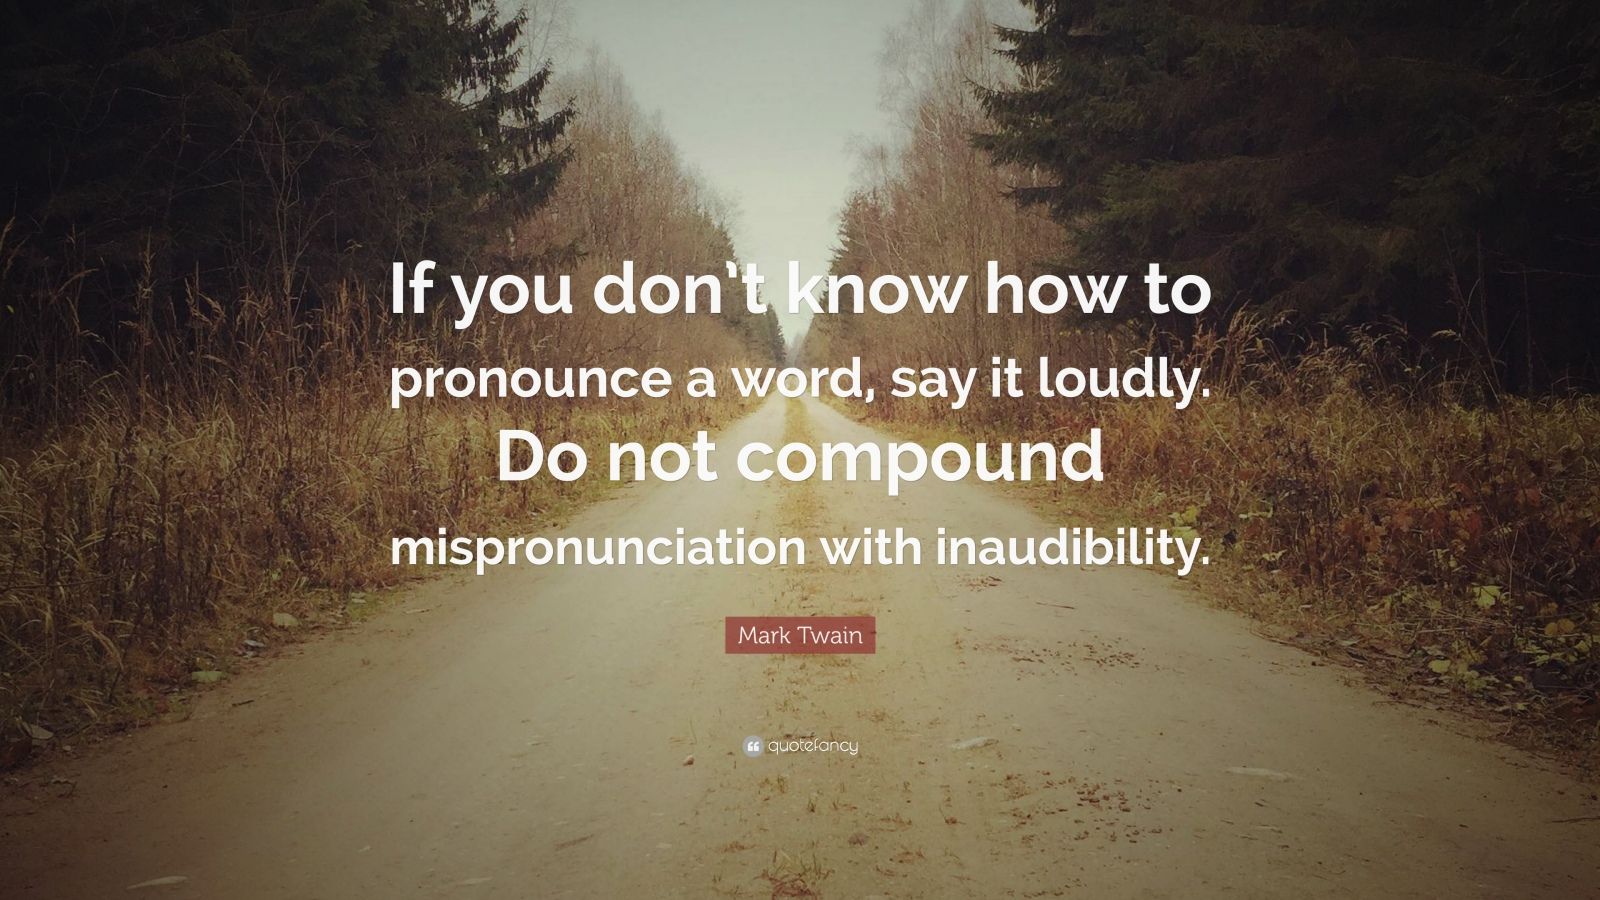 Mark Twain Quote: “If you don’t know how to pronounce a word, say it